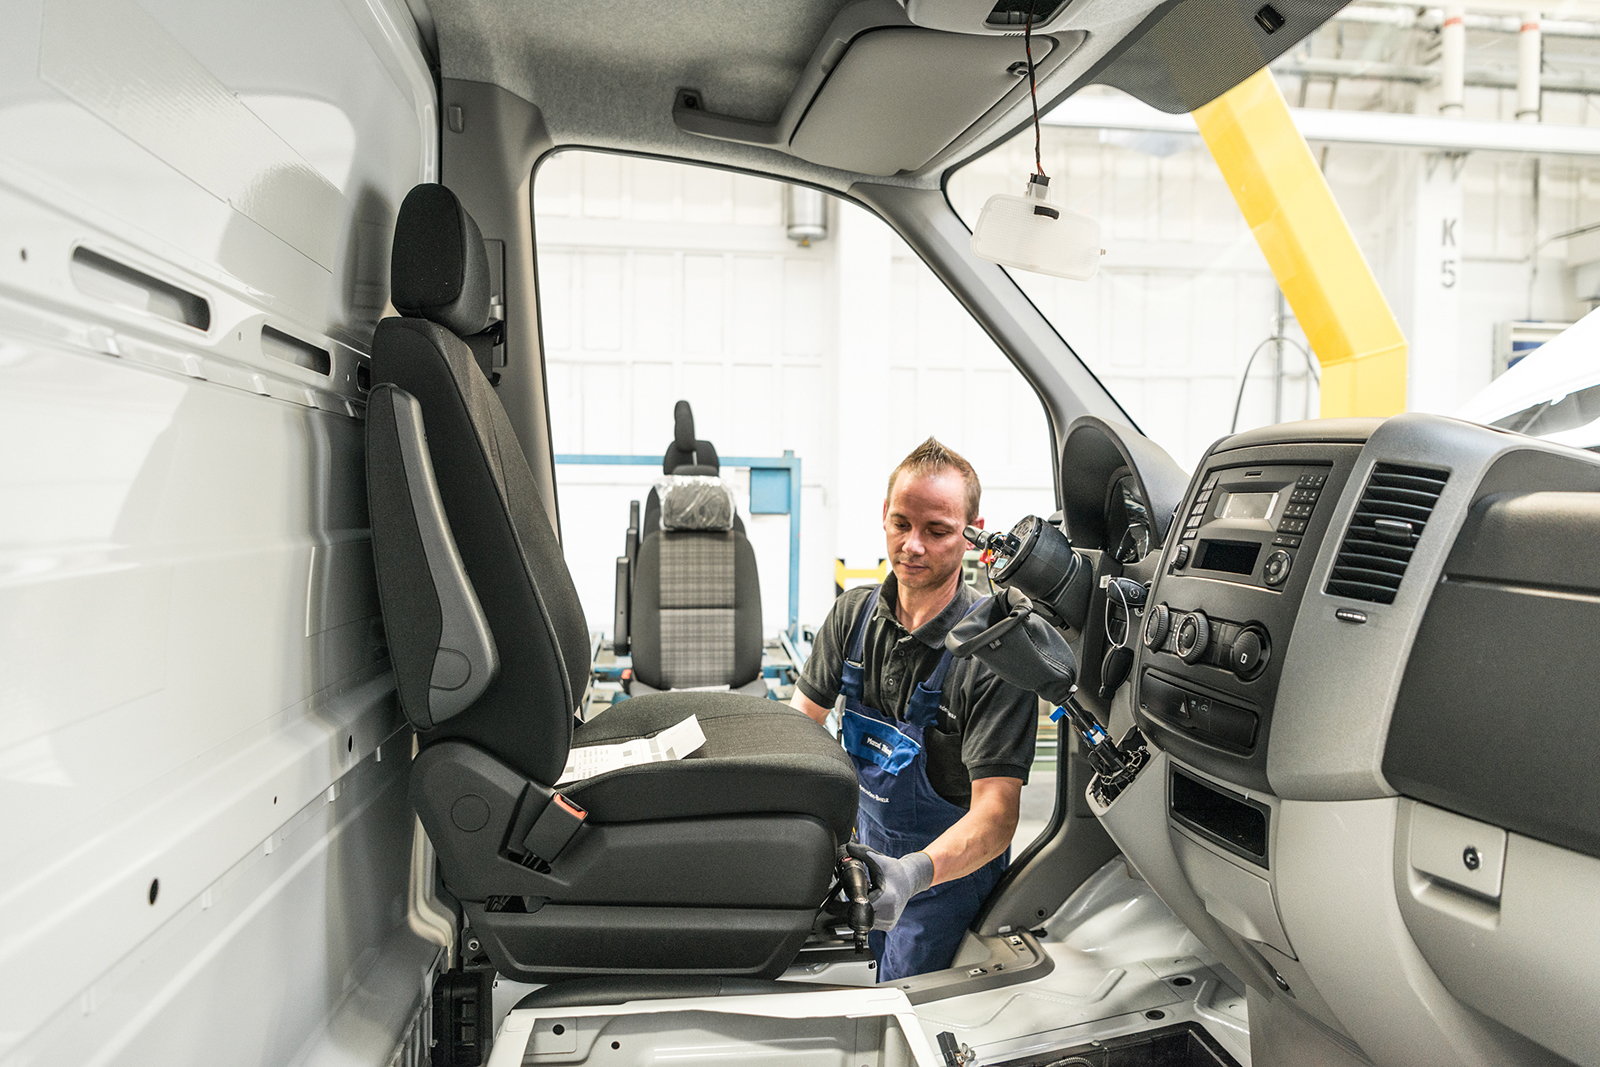 Interconnected technologies boost process reliability in manufacturing. First, side mirrors and seats were tagged with RFID tags in a pilot Phase.